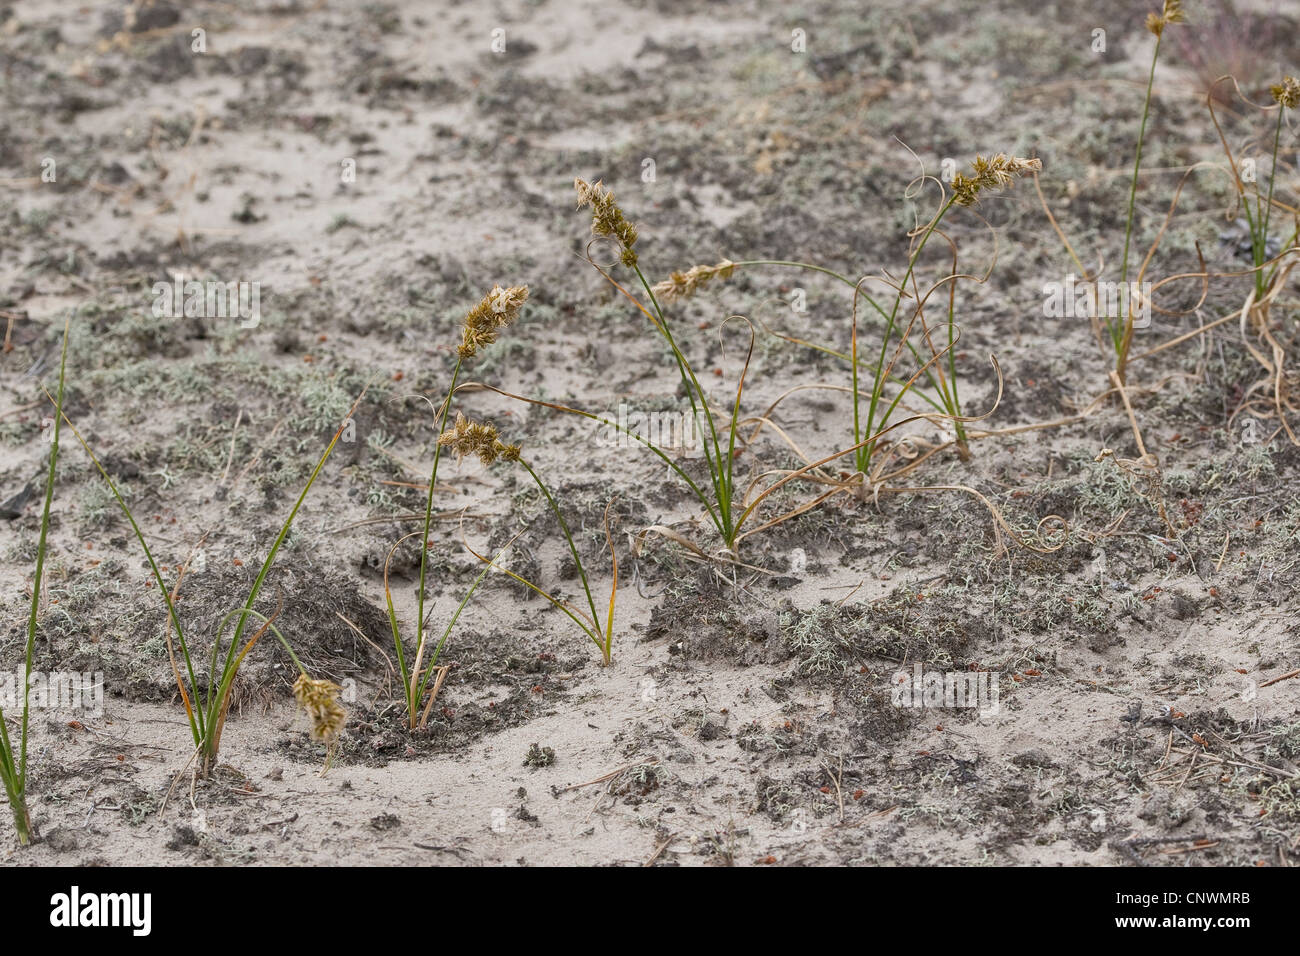 sand sedge (Carex arenaria), growing on a dune, Germany, Schleswig Stock Photo